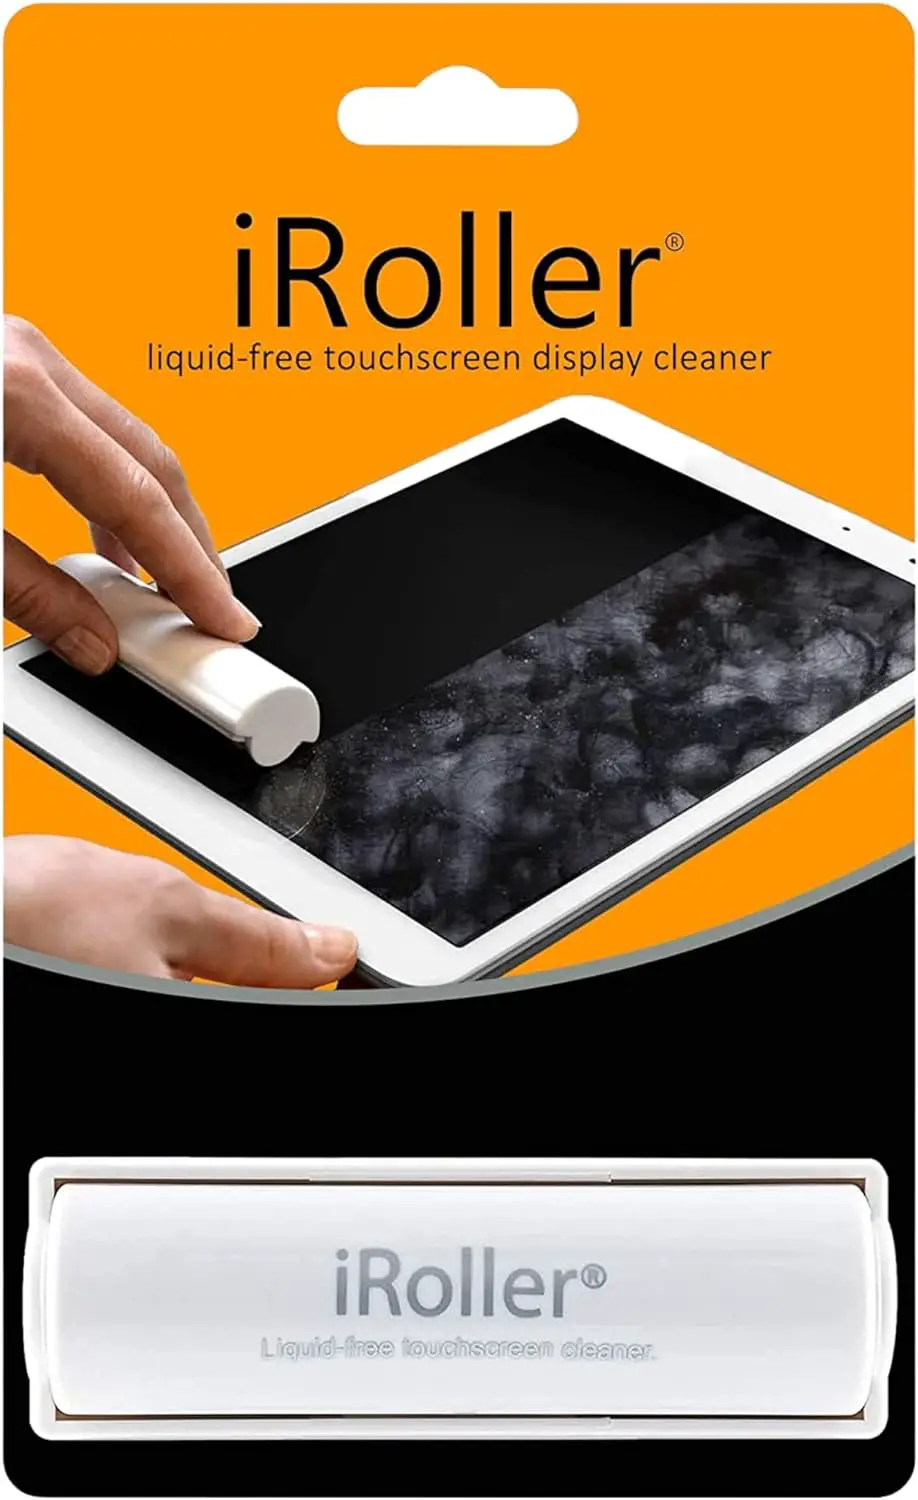 iRoller Premium Screen Cleaner, Reusable Non-Liquid, Non-Chemical Phone Cleaning Roller for iPhone, iPad, Laptop, MacBook, Computer Monitors, TV  Smartphones - No Wipes, Cloth or Spray Required